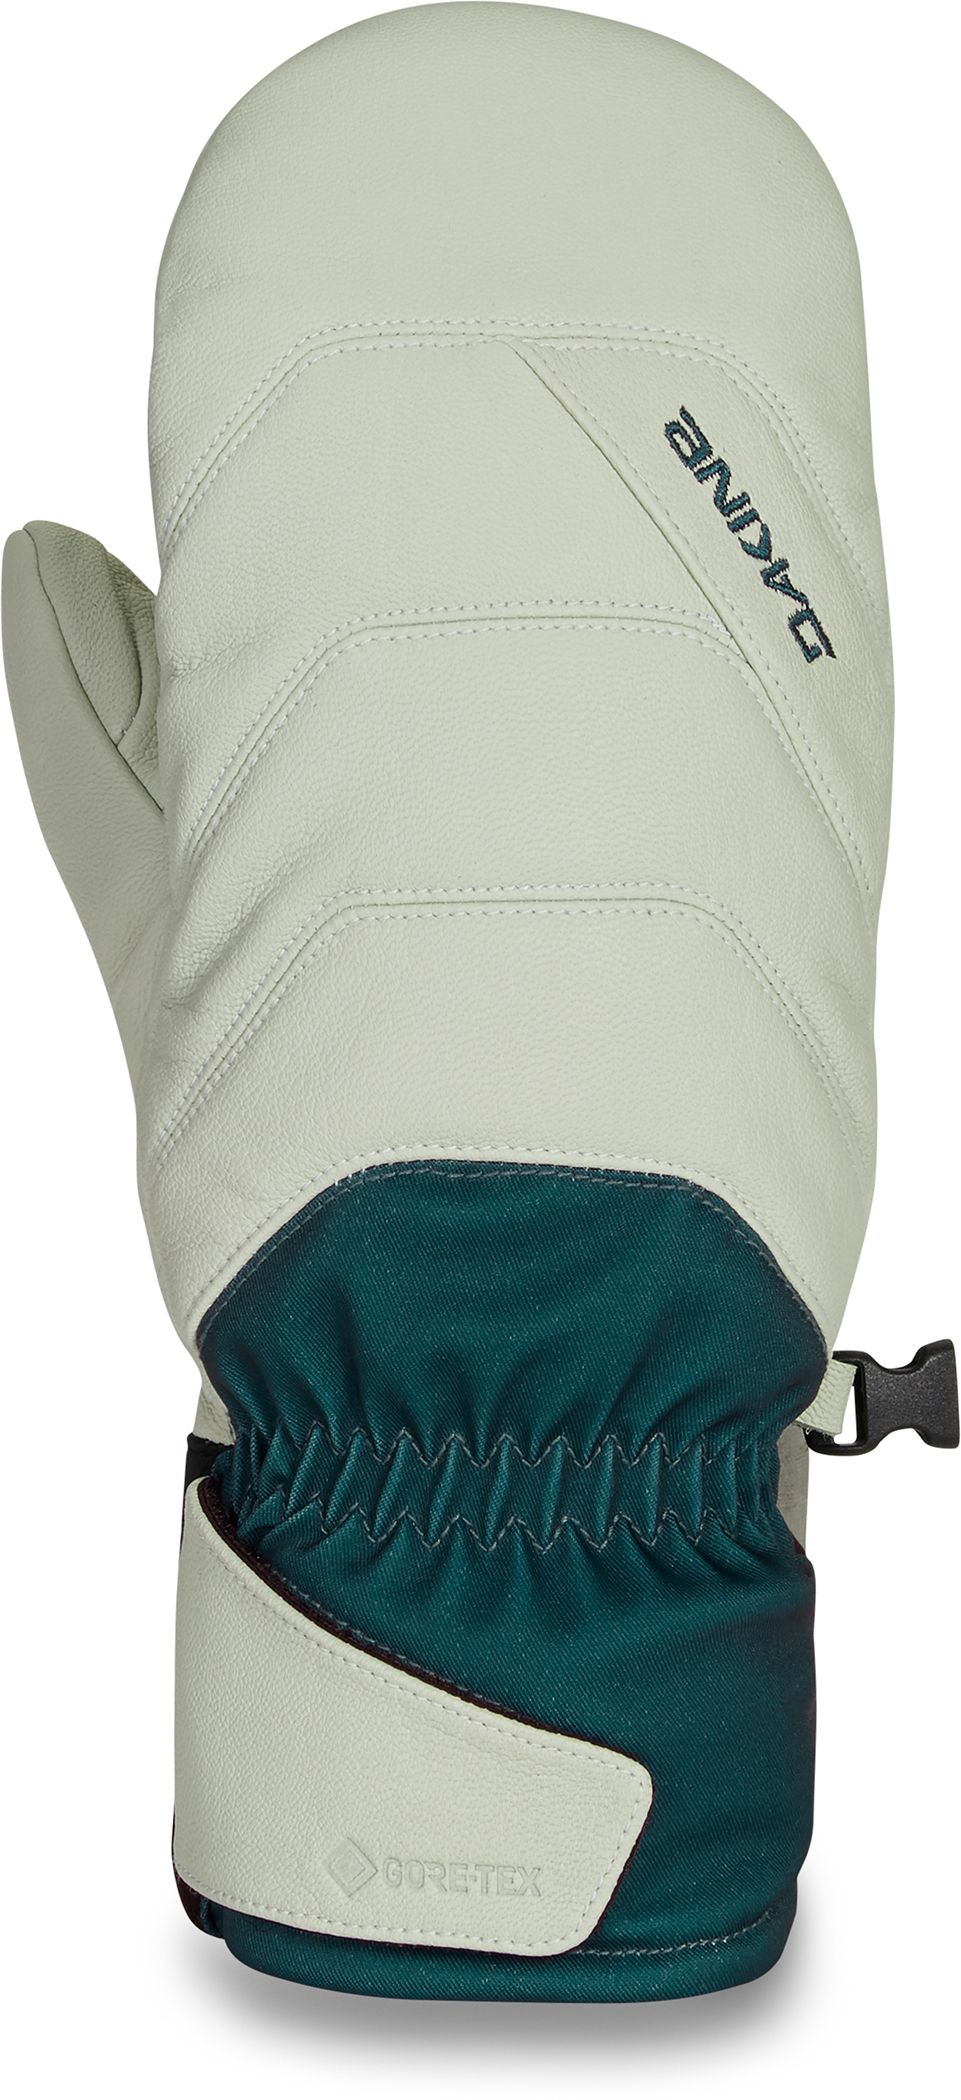 Moufles Galaxy Gore tex Green Lily 